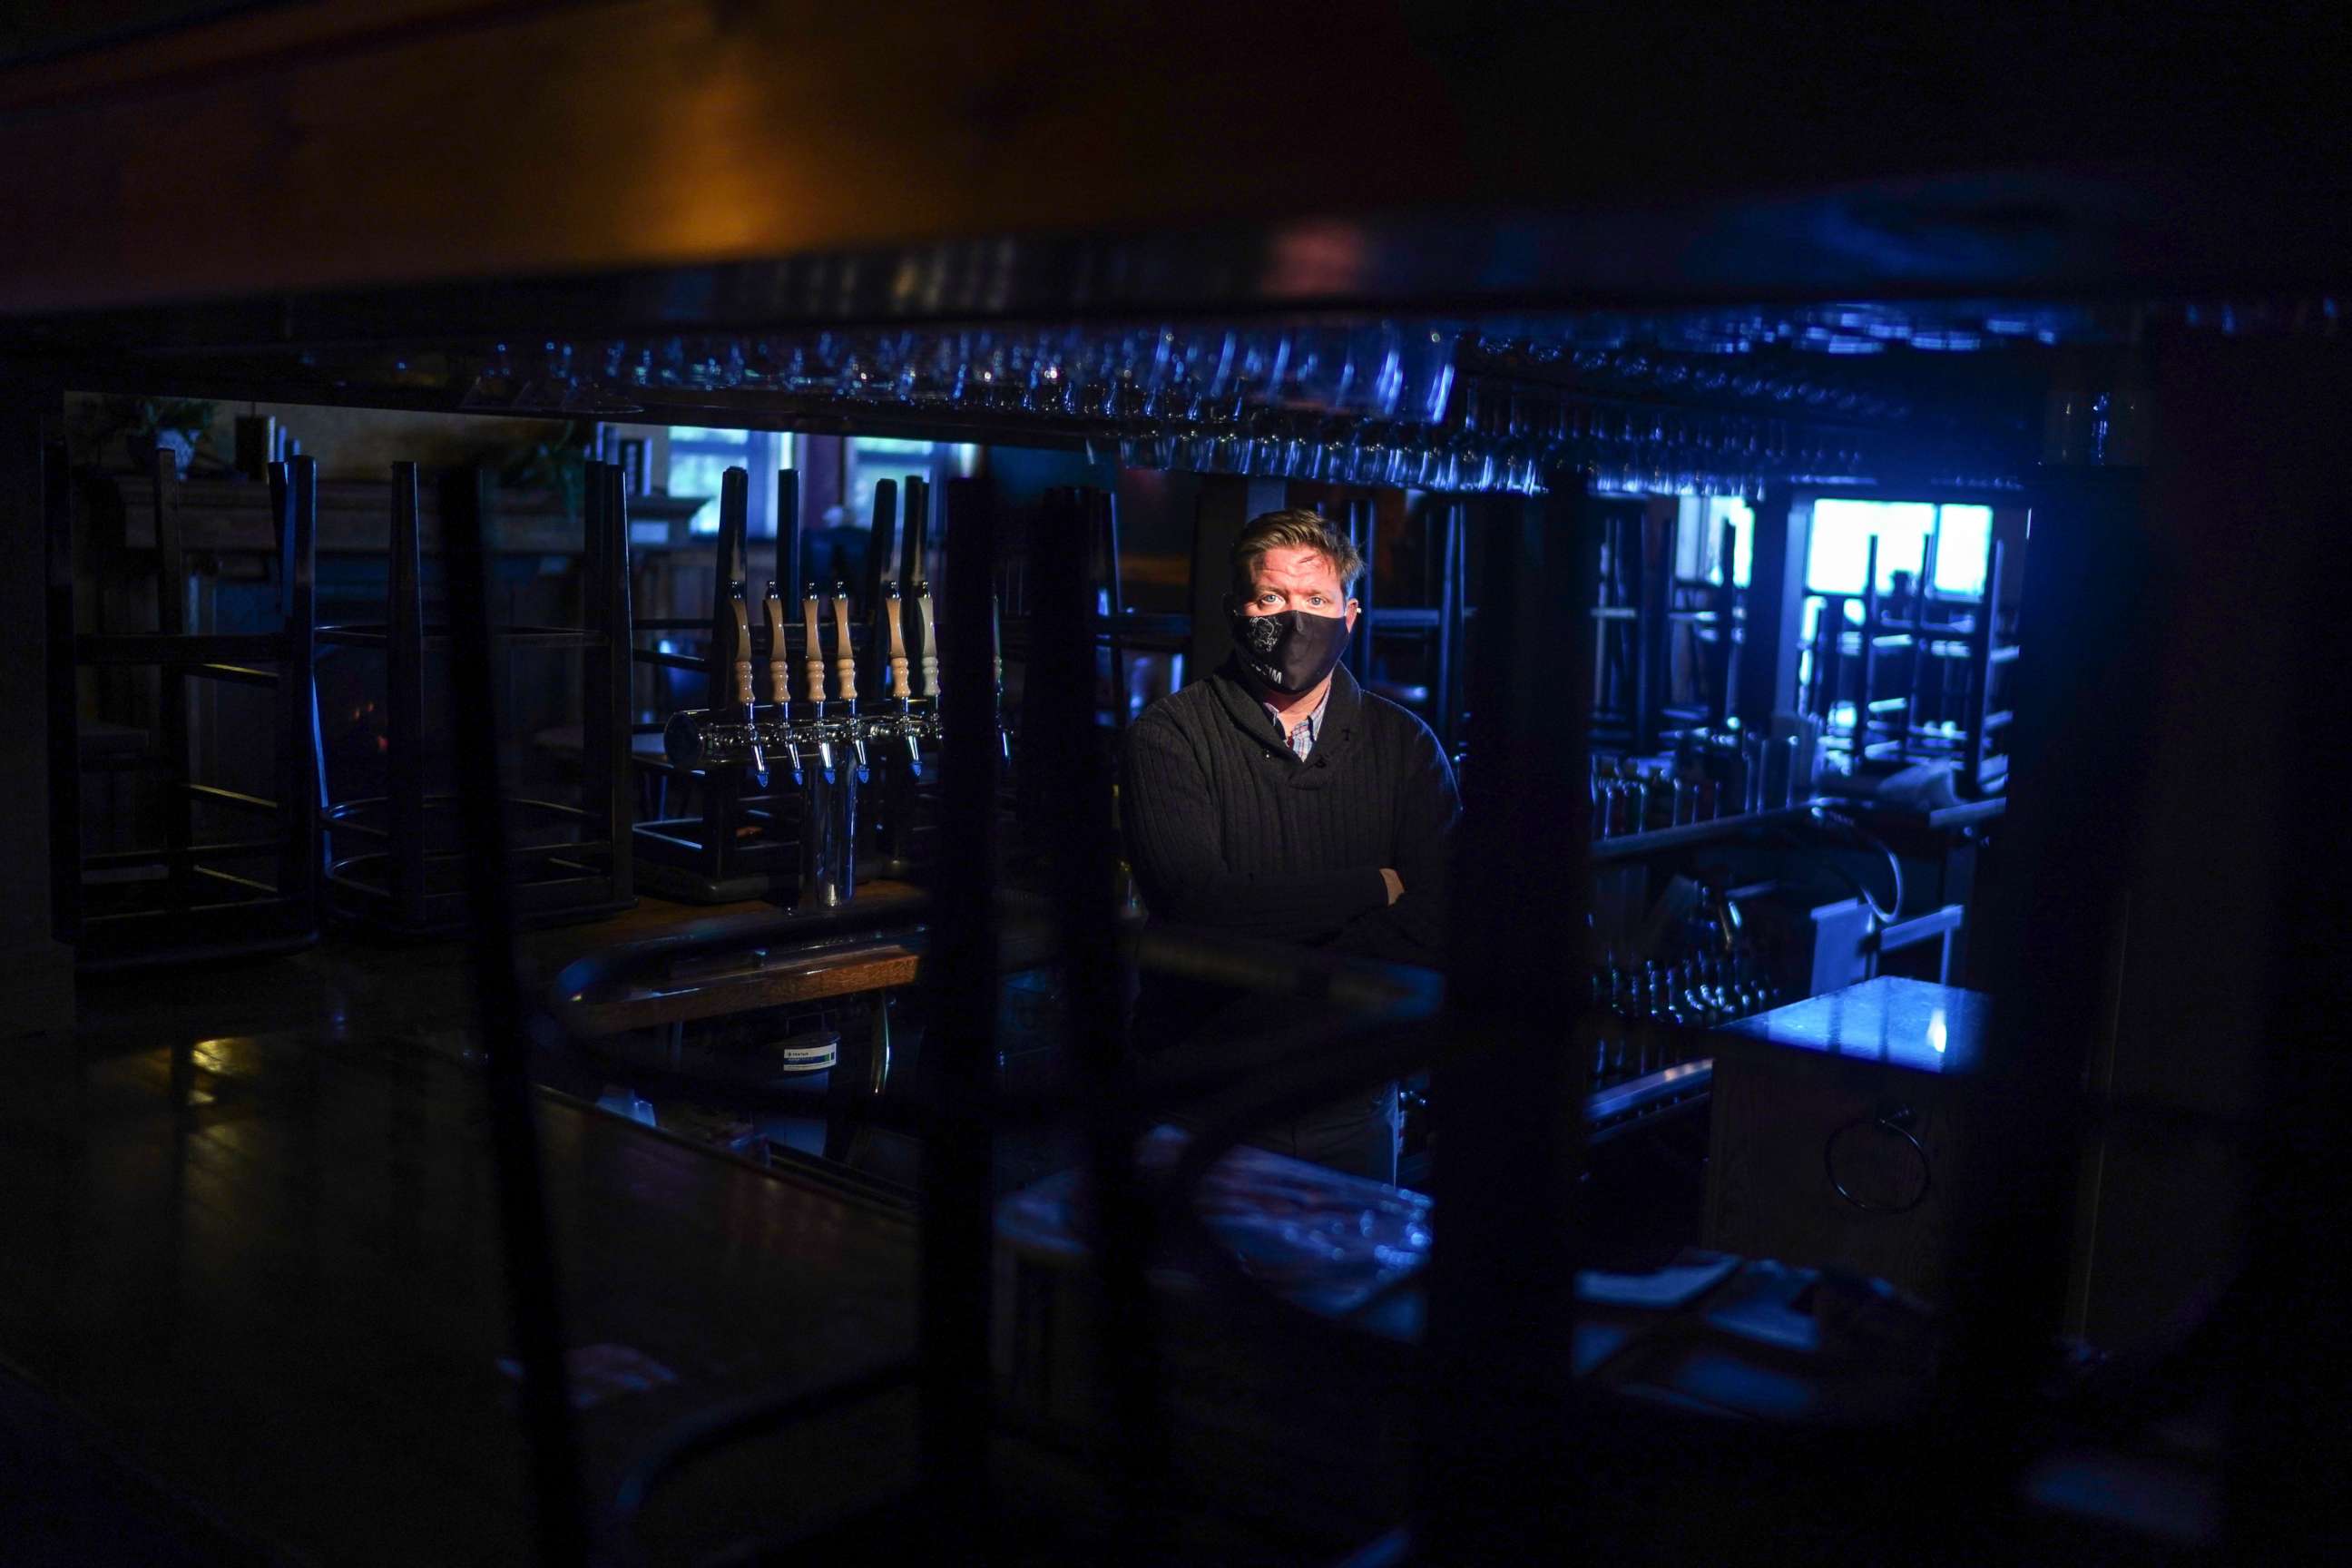 PHOTO: Kirk Bangstad, owner of the Minocqua Brewing Co., is a fierce advocate for stricter measures to combat the coronavirus, in Minocqua, Wis., Oct. 27, 2020.